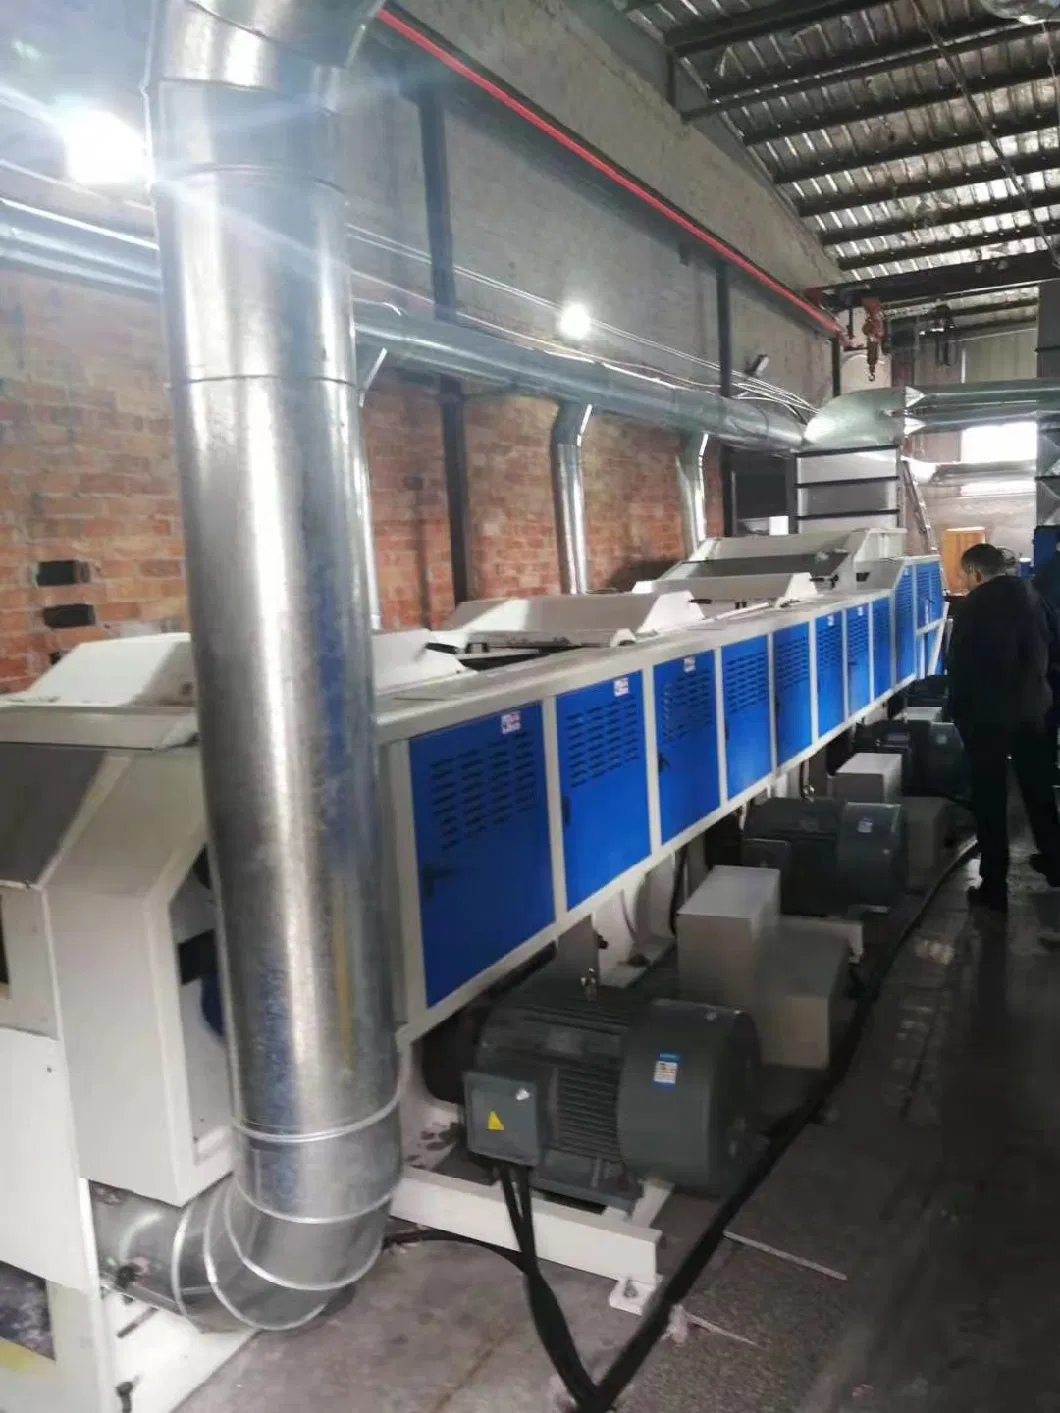 Waste Cloth Recycling Machine Garment Machine Cloth Machine Textile Fabric Recycling Machine Handle Cotton Dust Waste Produce in Fabric Printing Mills